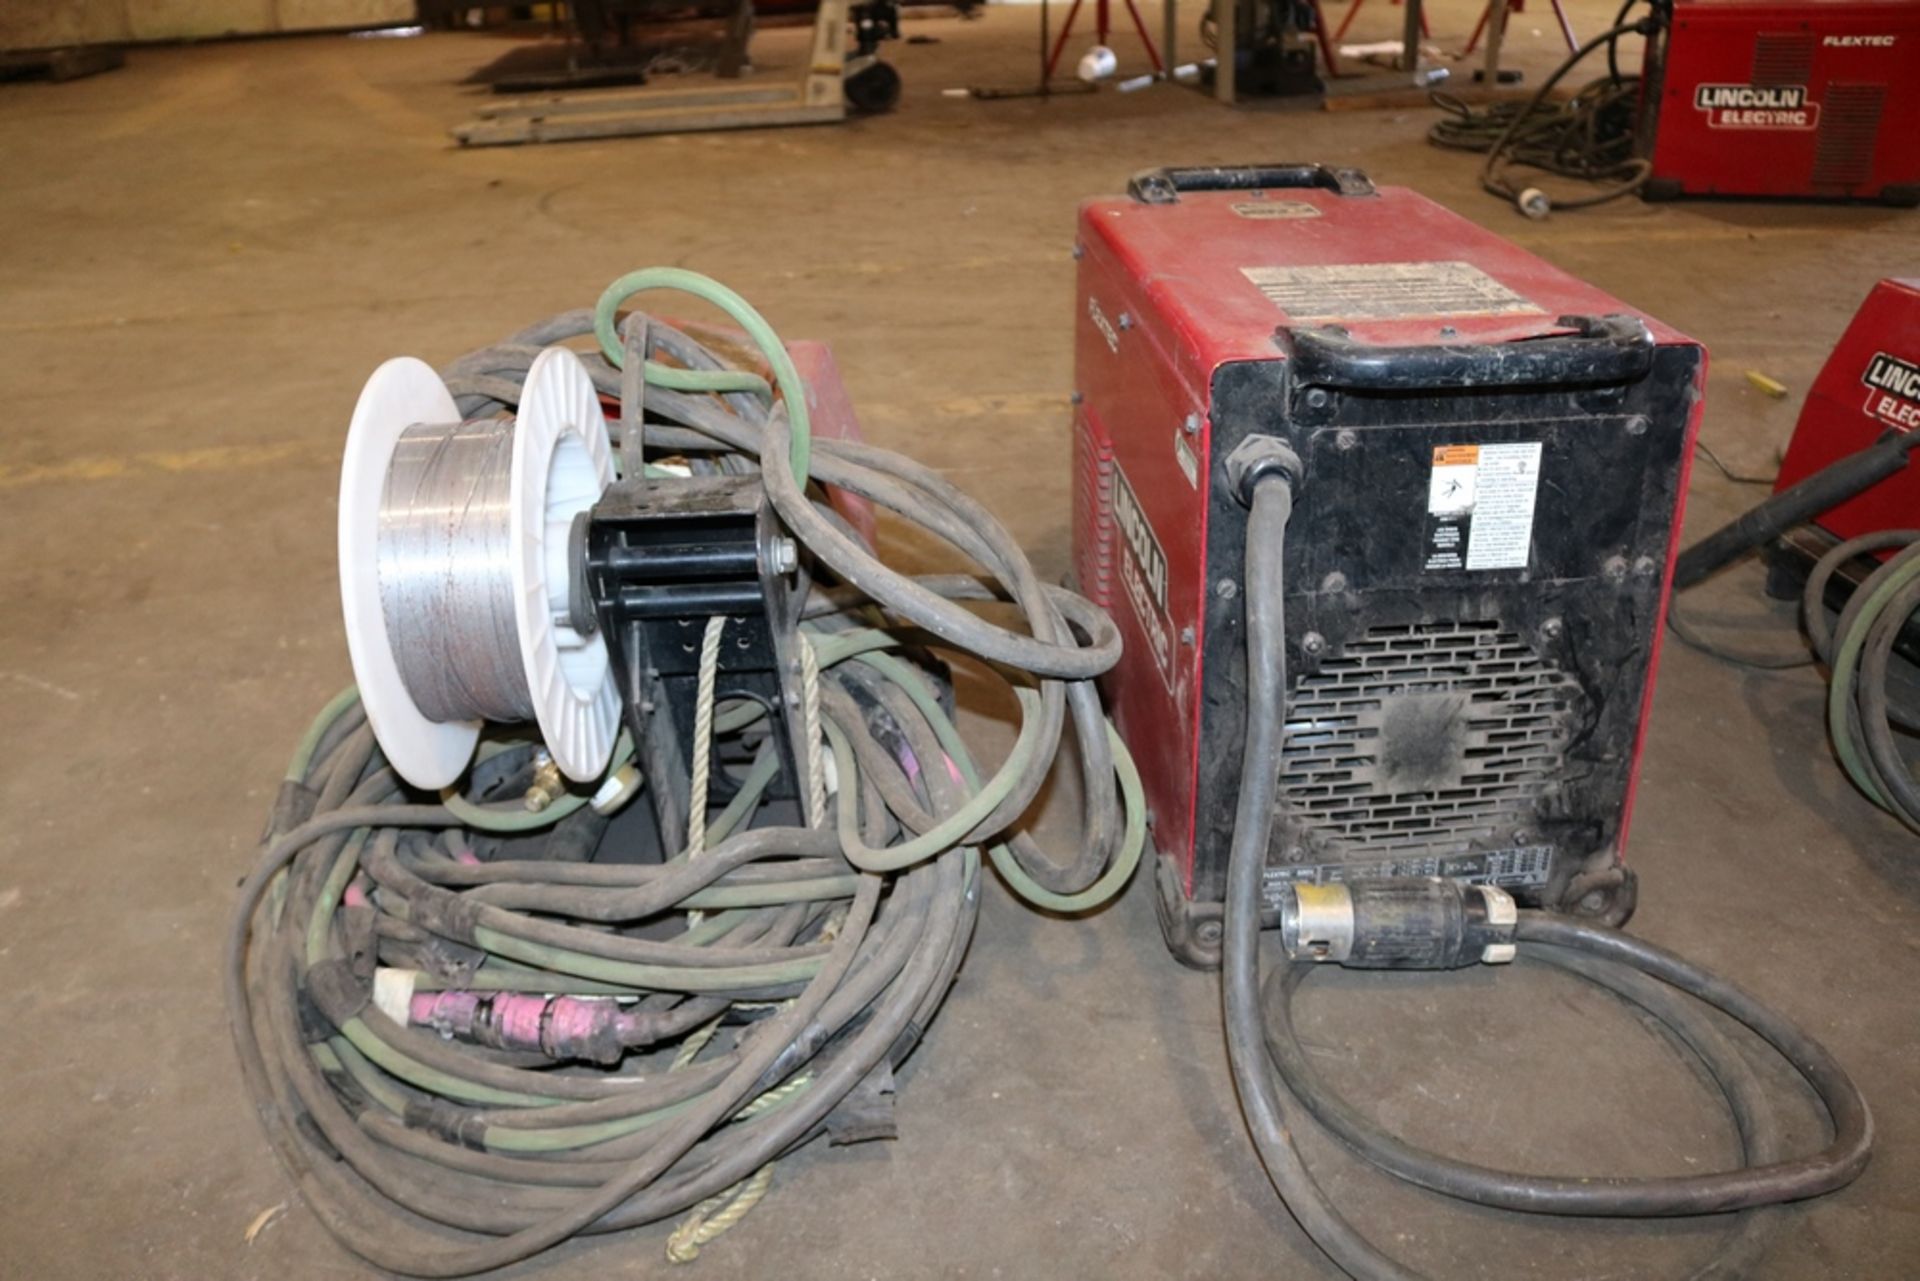 2020 Lincoln Electric Flextec 500X Welder with LF-72 Feeder - Image 5 of 8